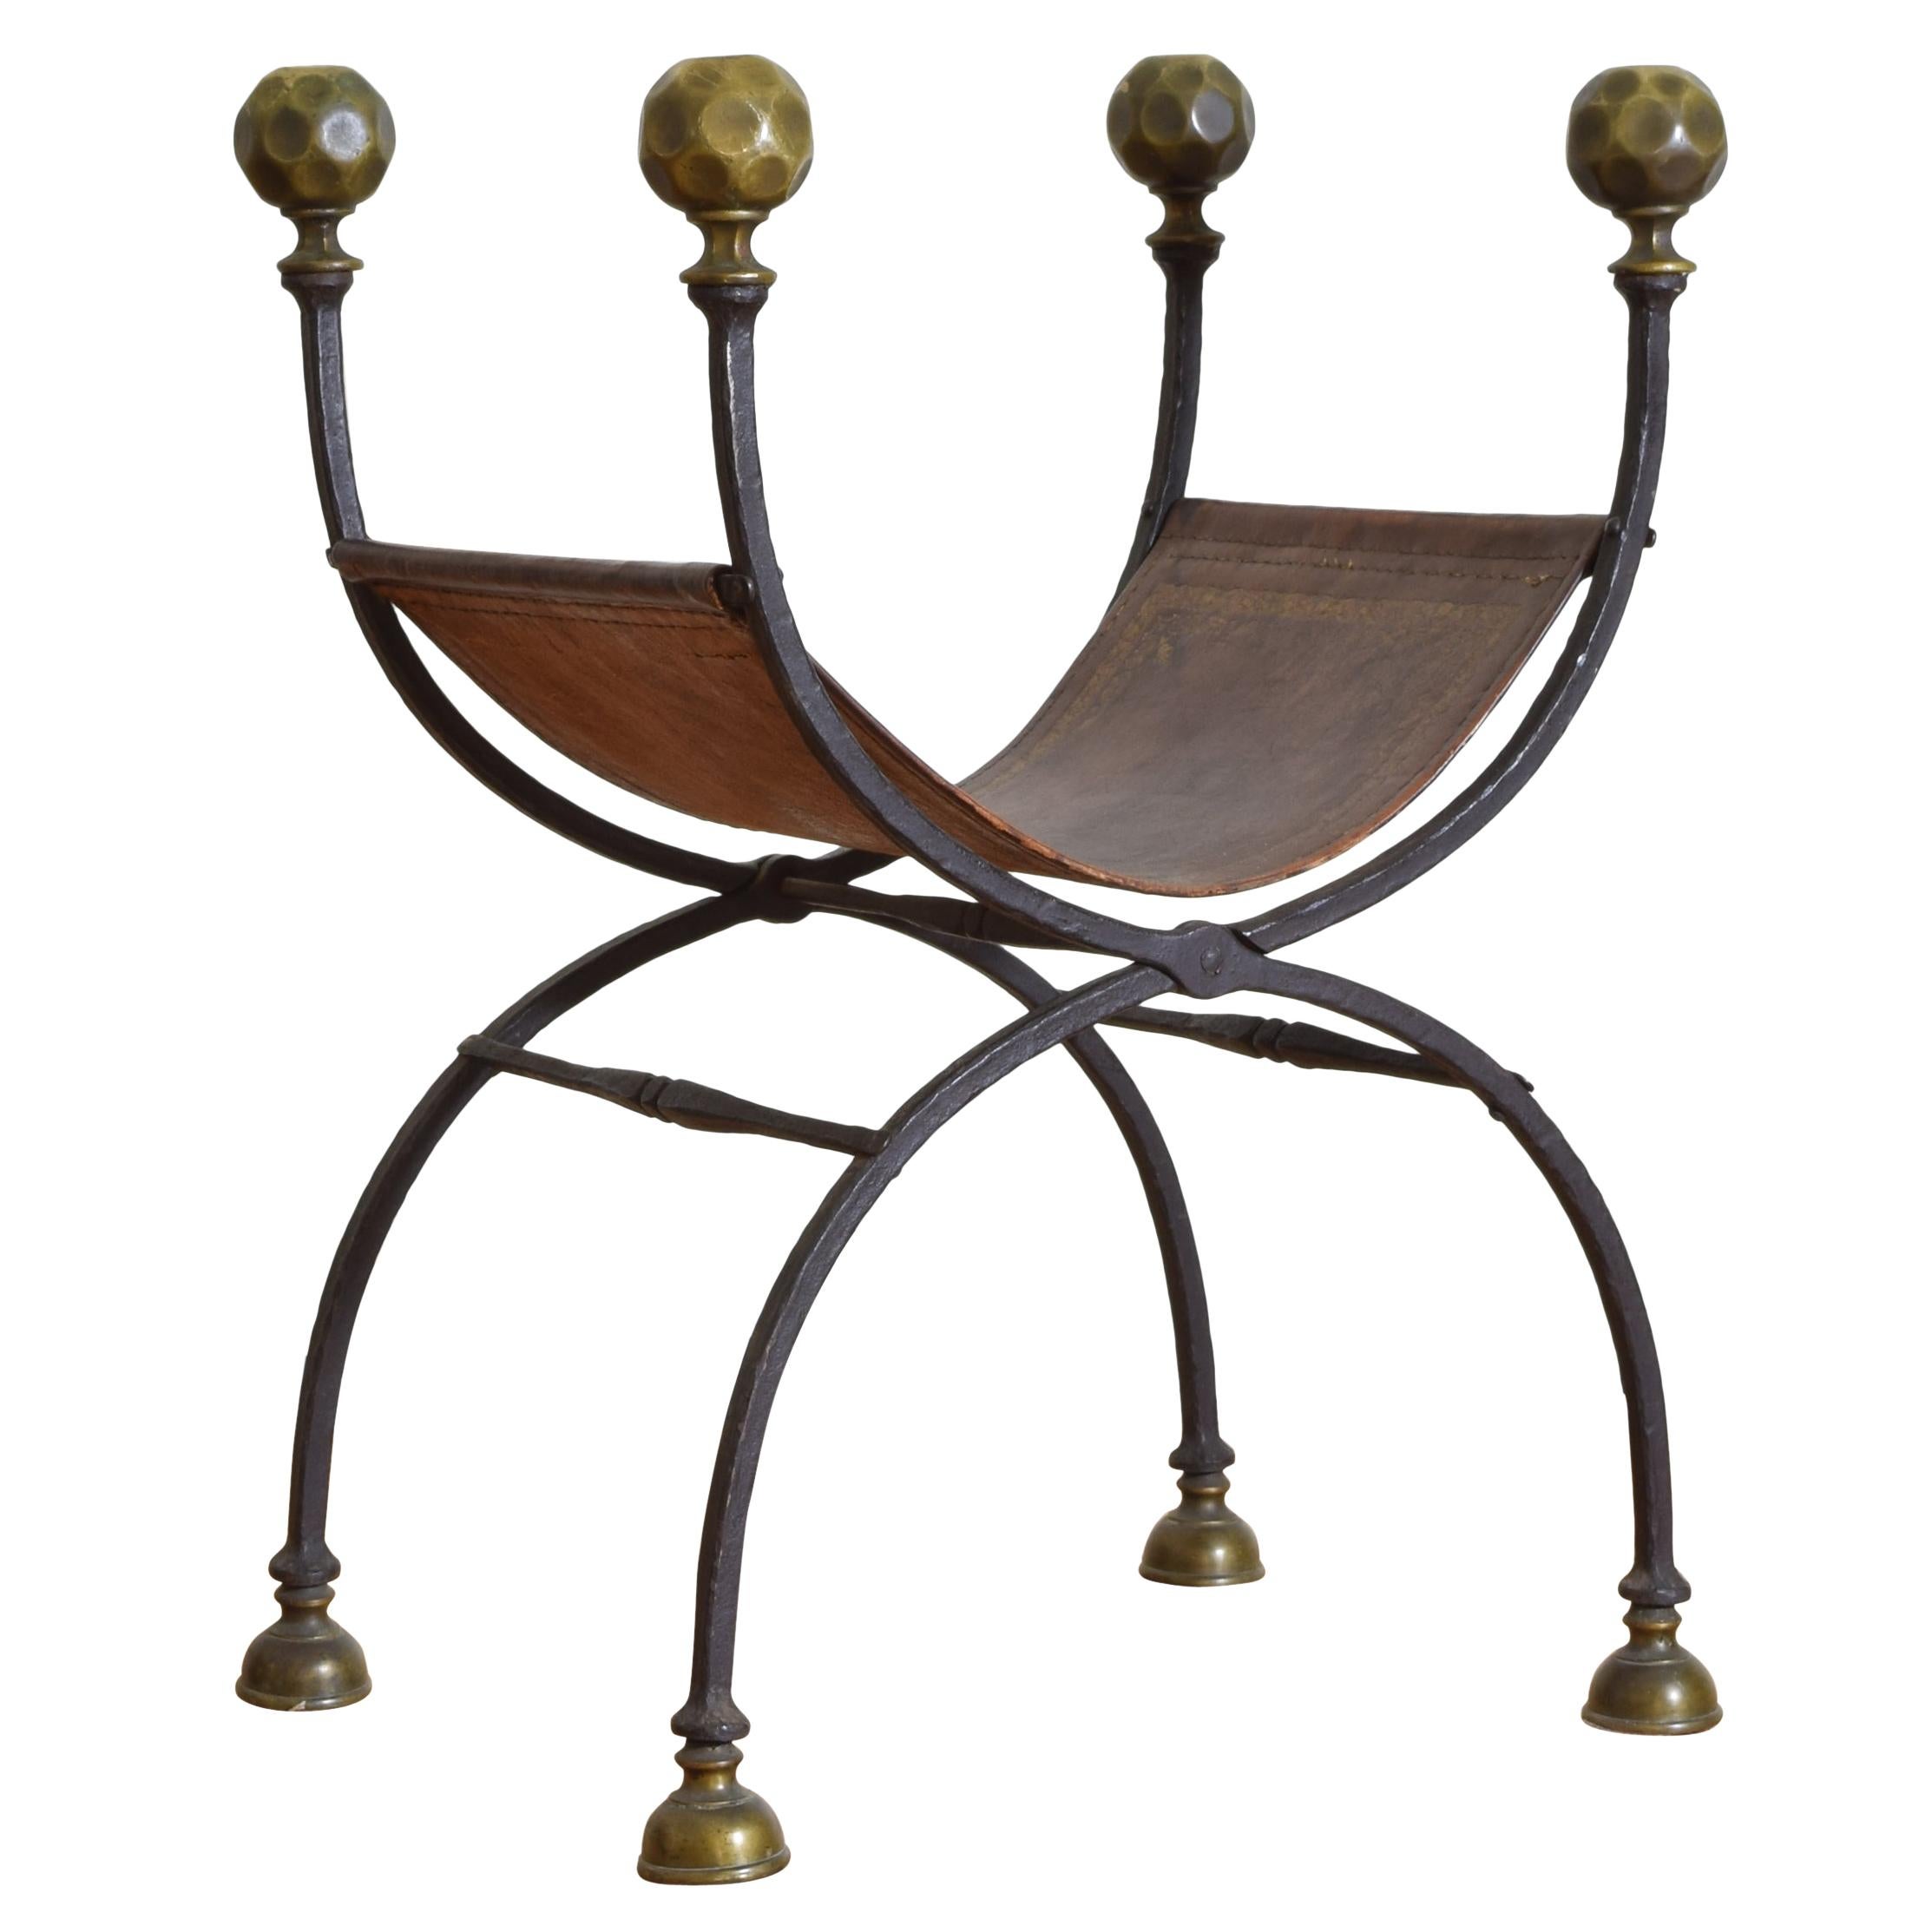 Italian Renaissance Wrought Iron, Bronze, and Leather Curule Form Chair